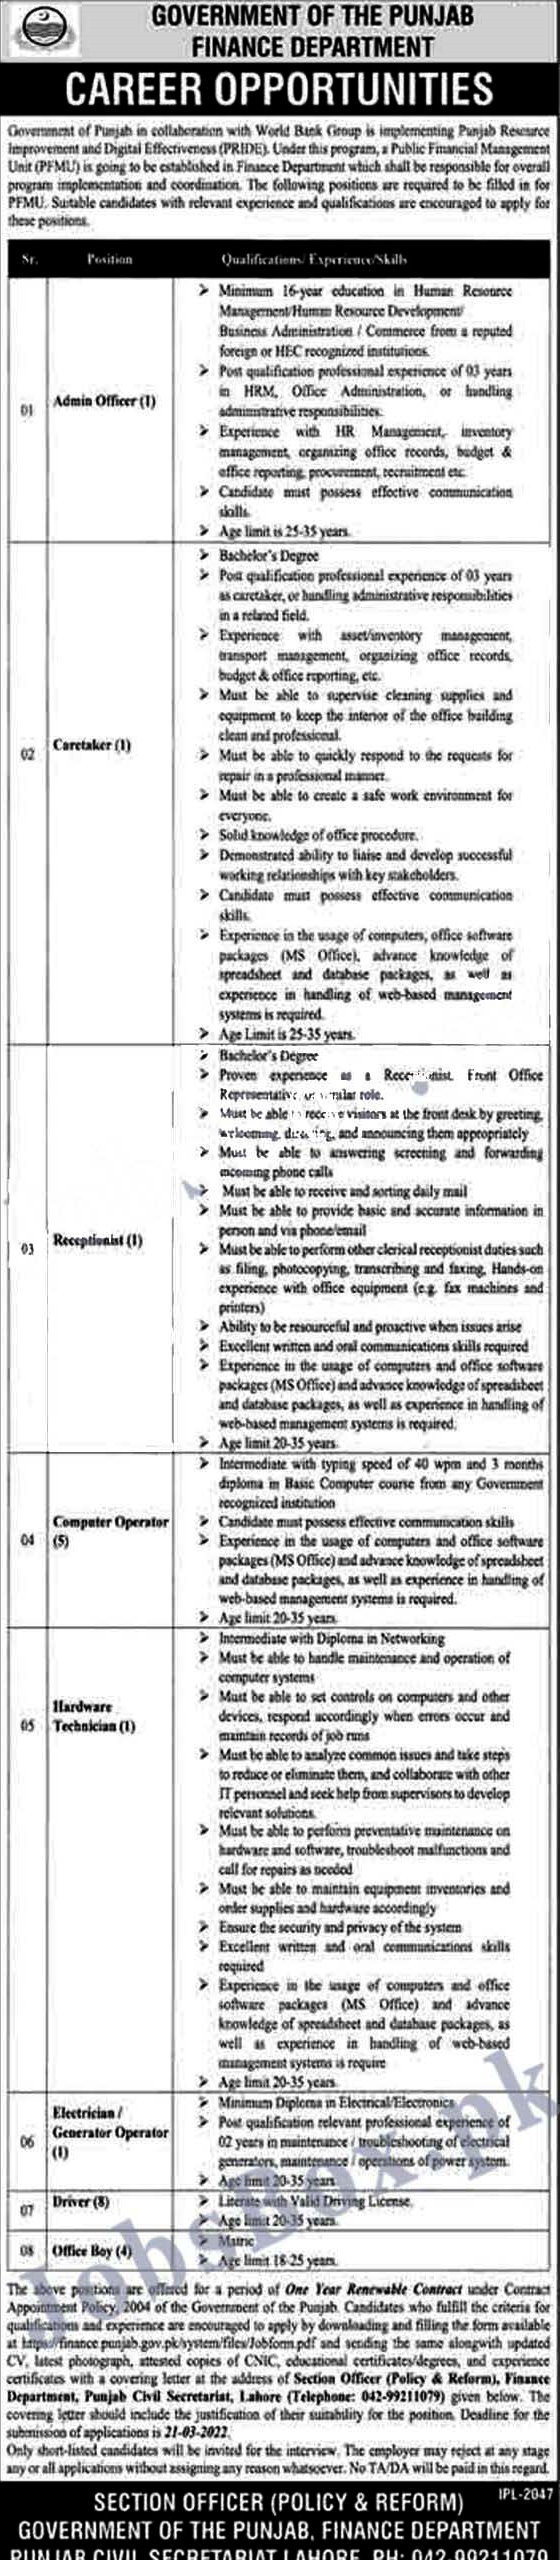 Finance Department of the Government of Punjab Jobs